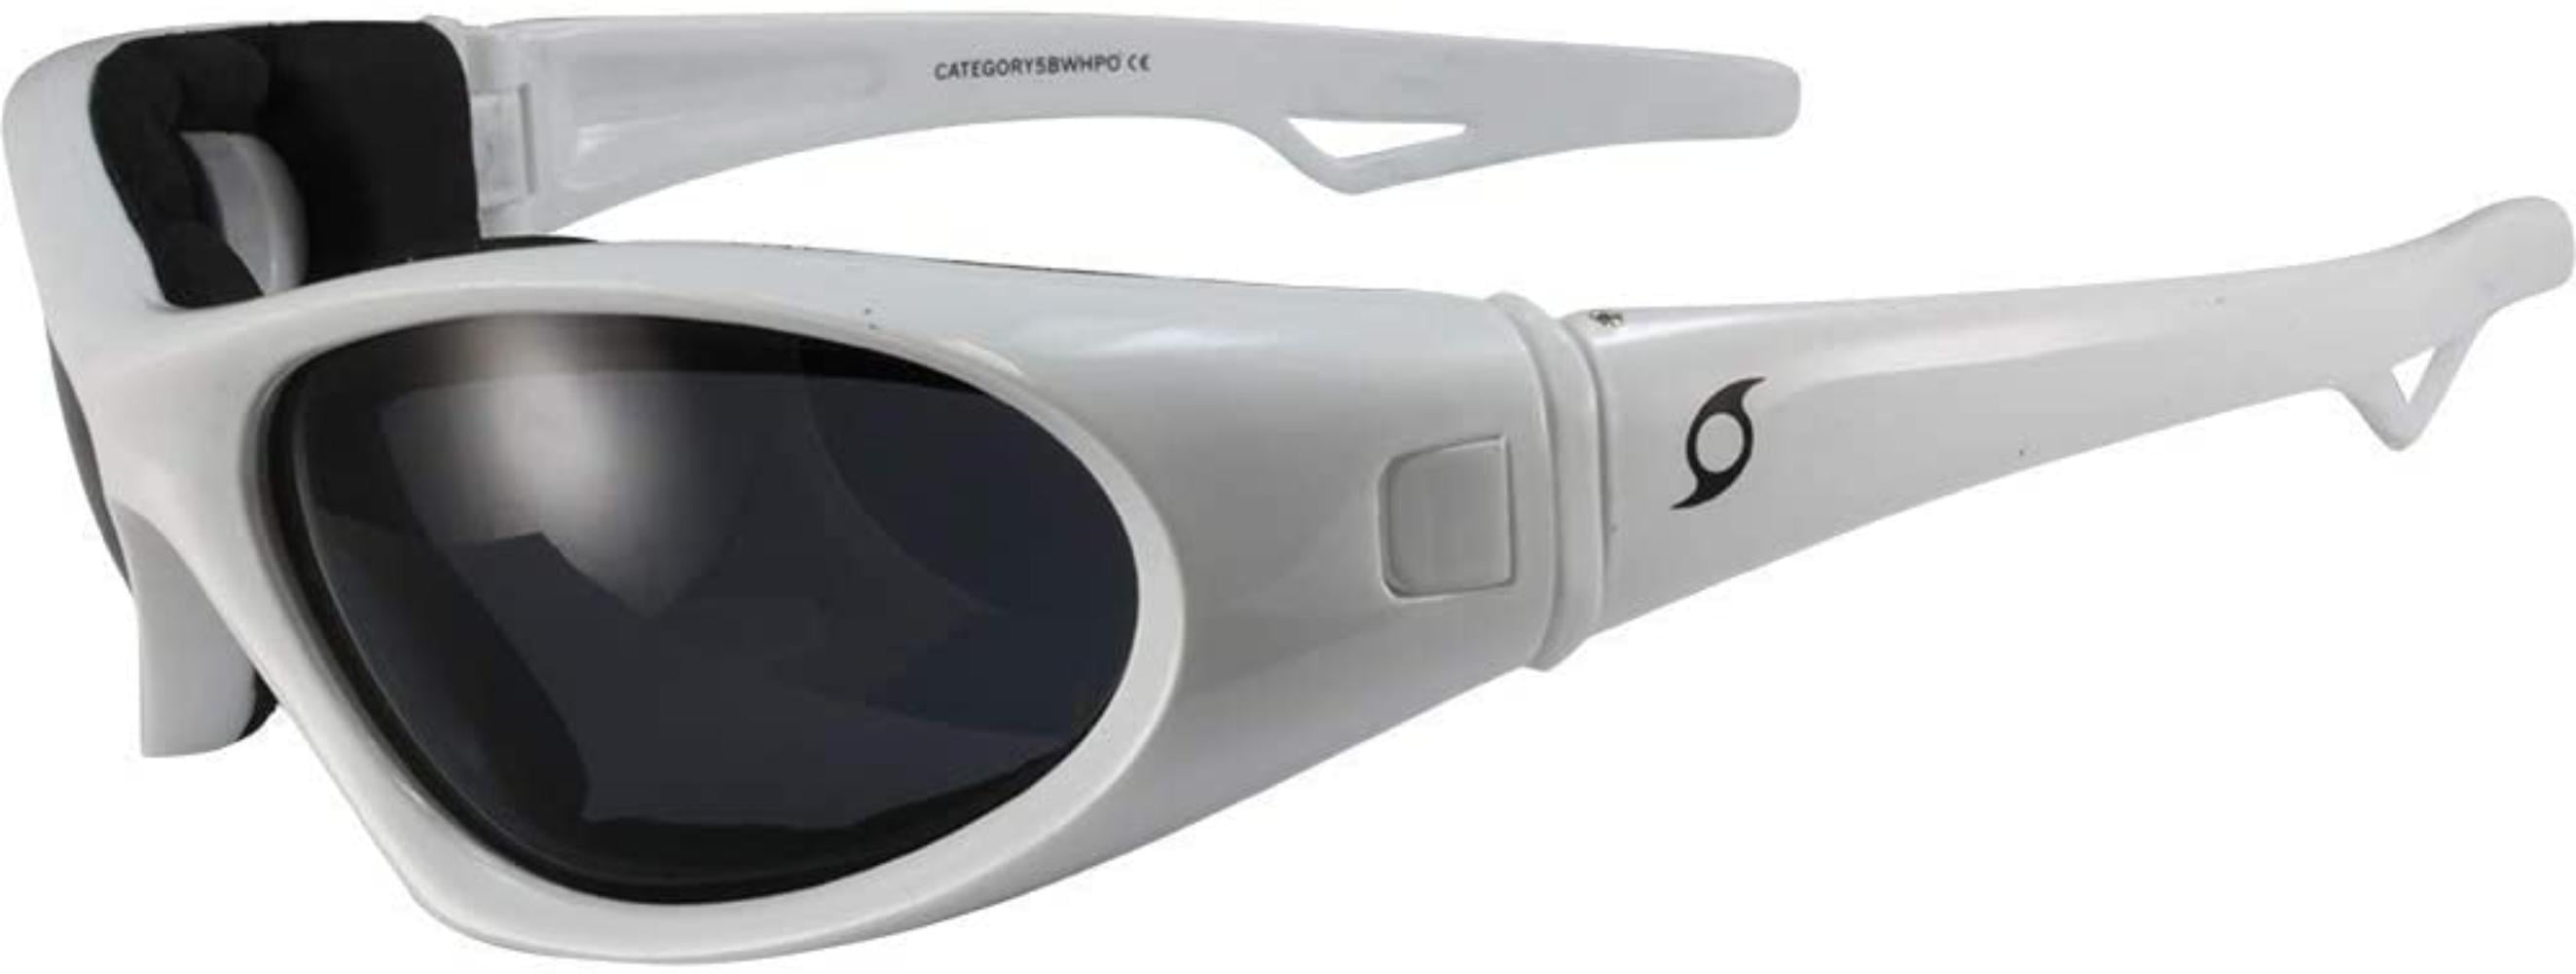 HURRICANE Category-5 White Jet Ski Water-Sport Floating Goggles with Polarized Smoke Lens Interchangeable Sunglasses to Goggles 